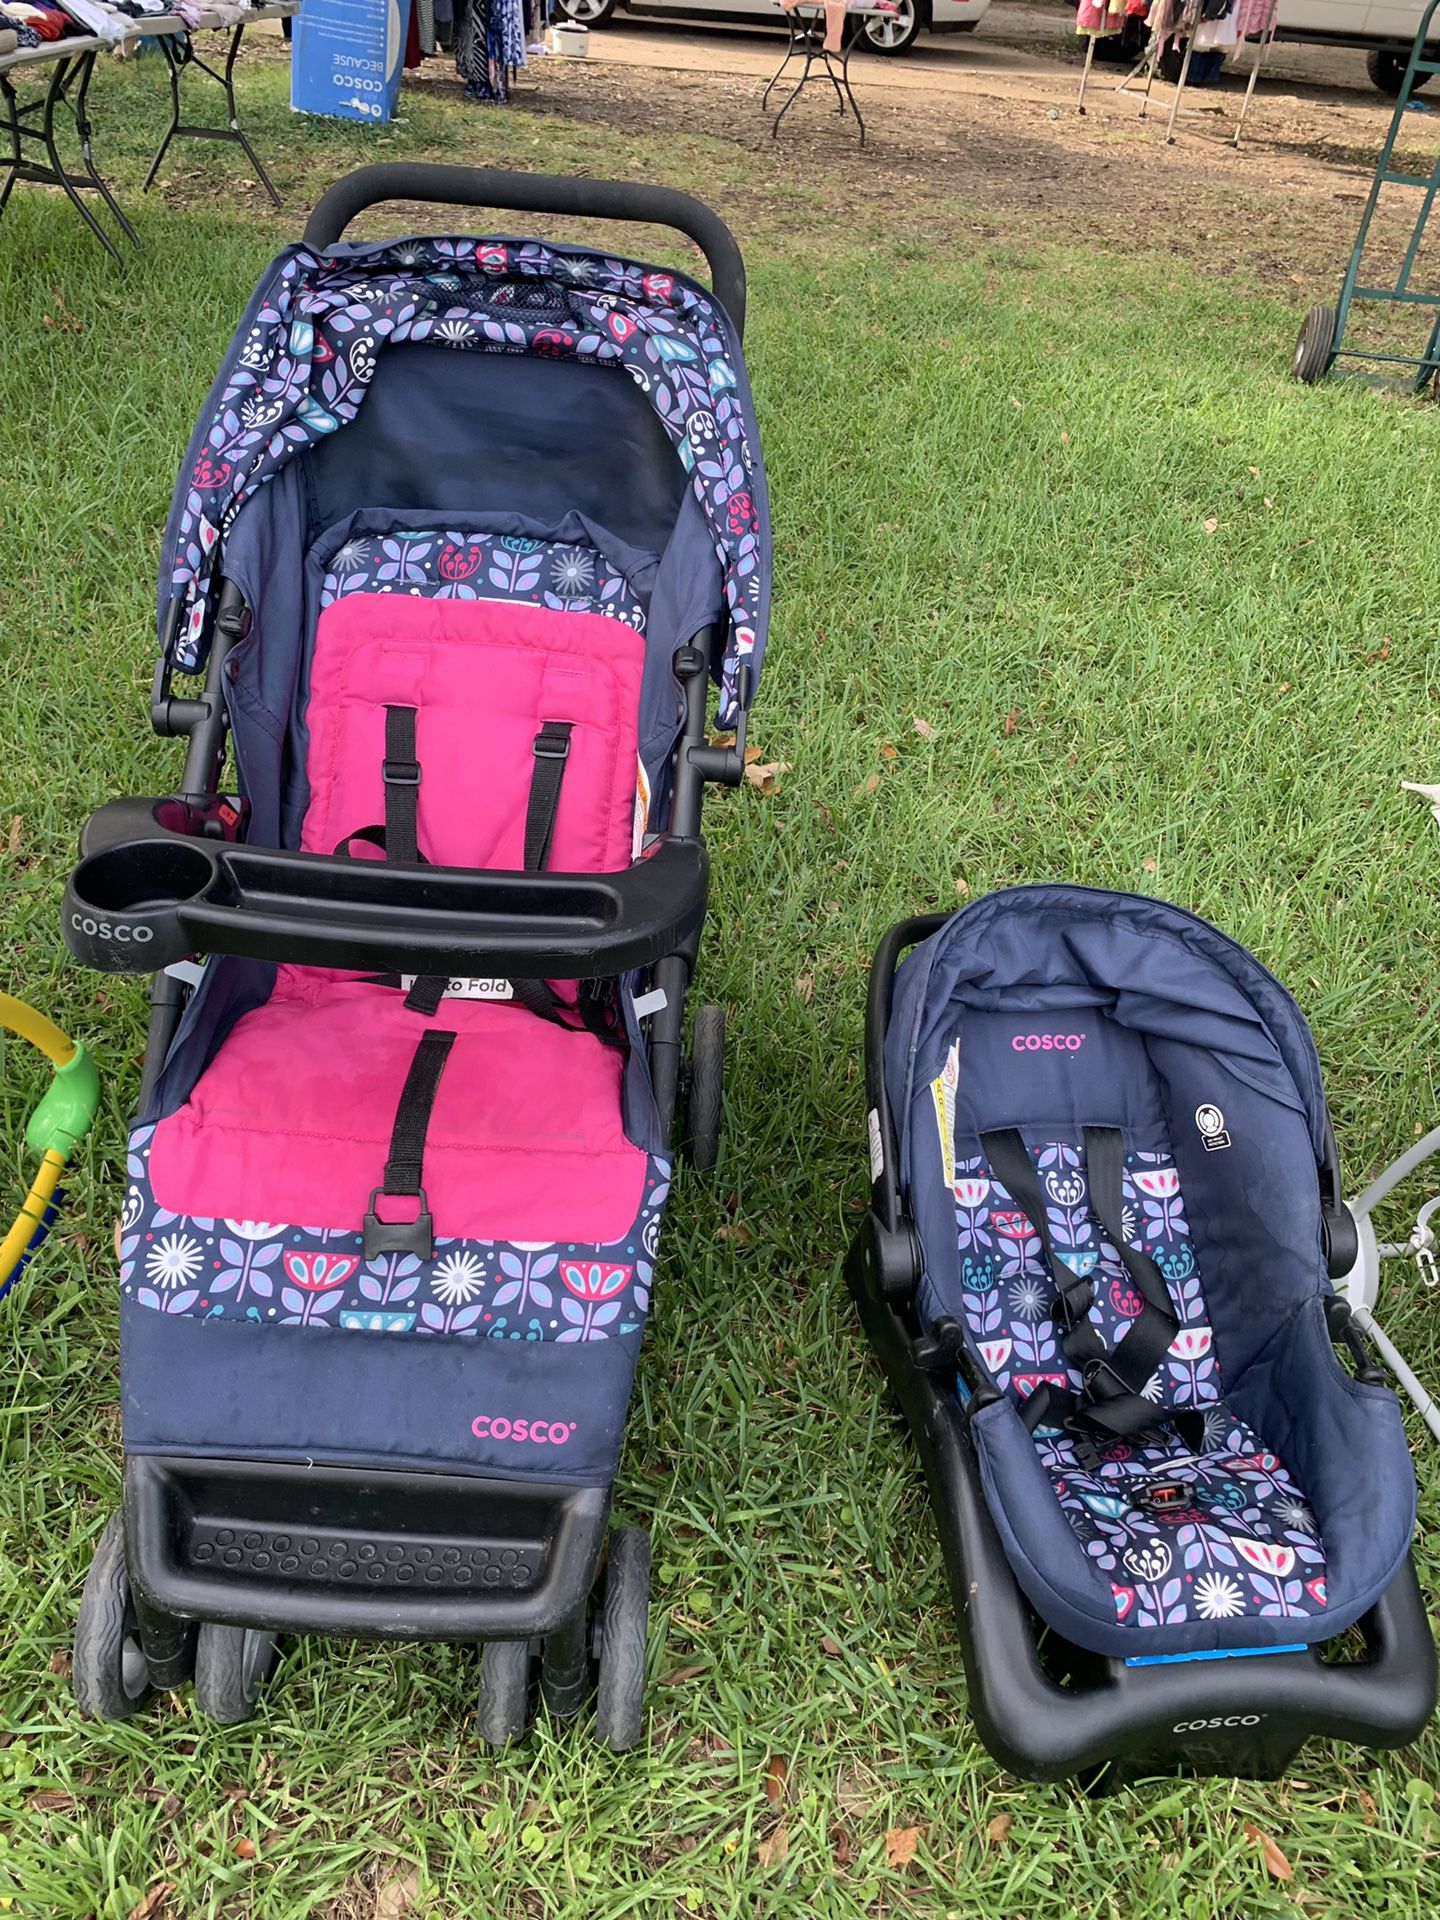 Cosco baby stroller and car seat